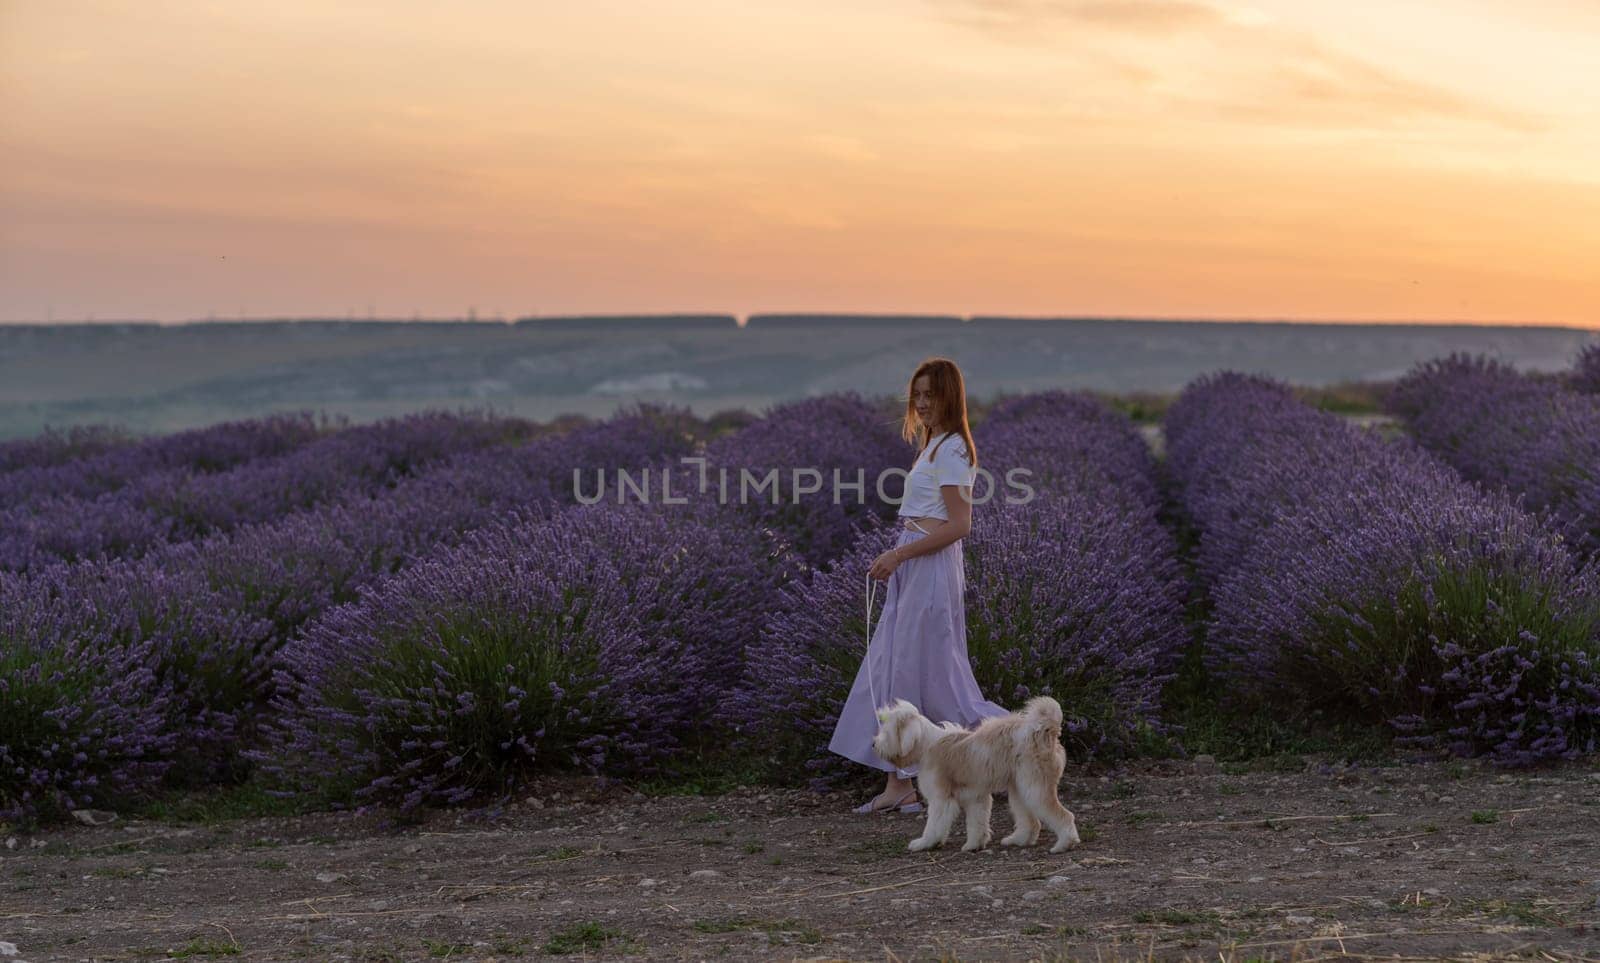 A woman and her dog walk through a field of lavender. The sky is a beautiful orange and pink color, creating a peaceful and serene atmosphere